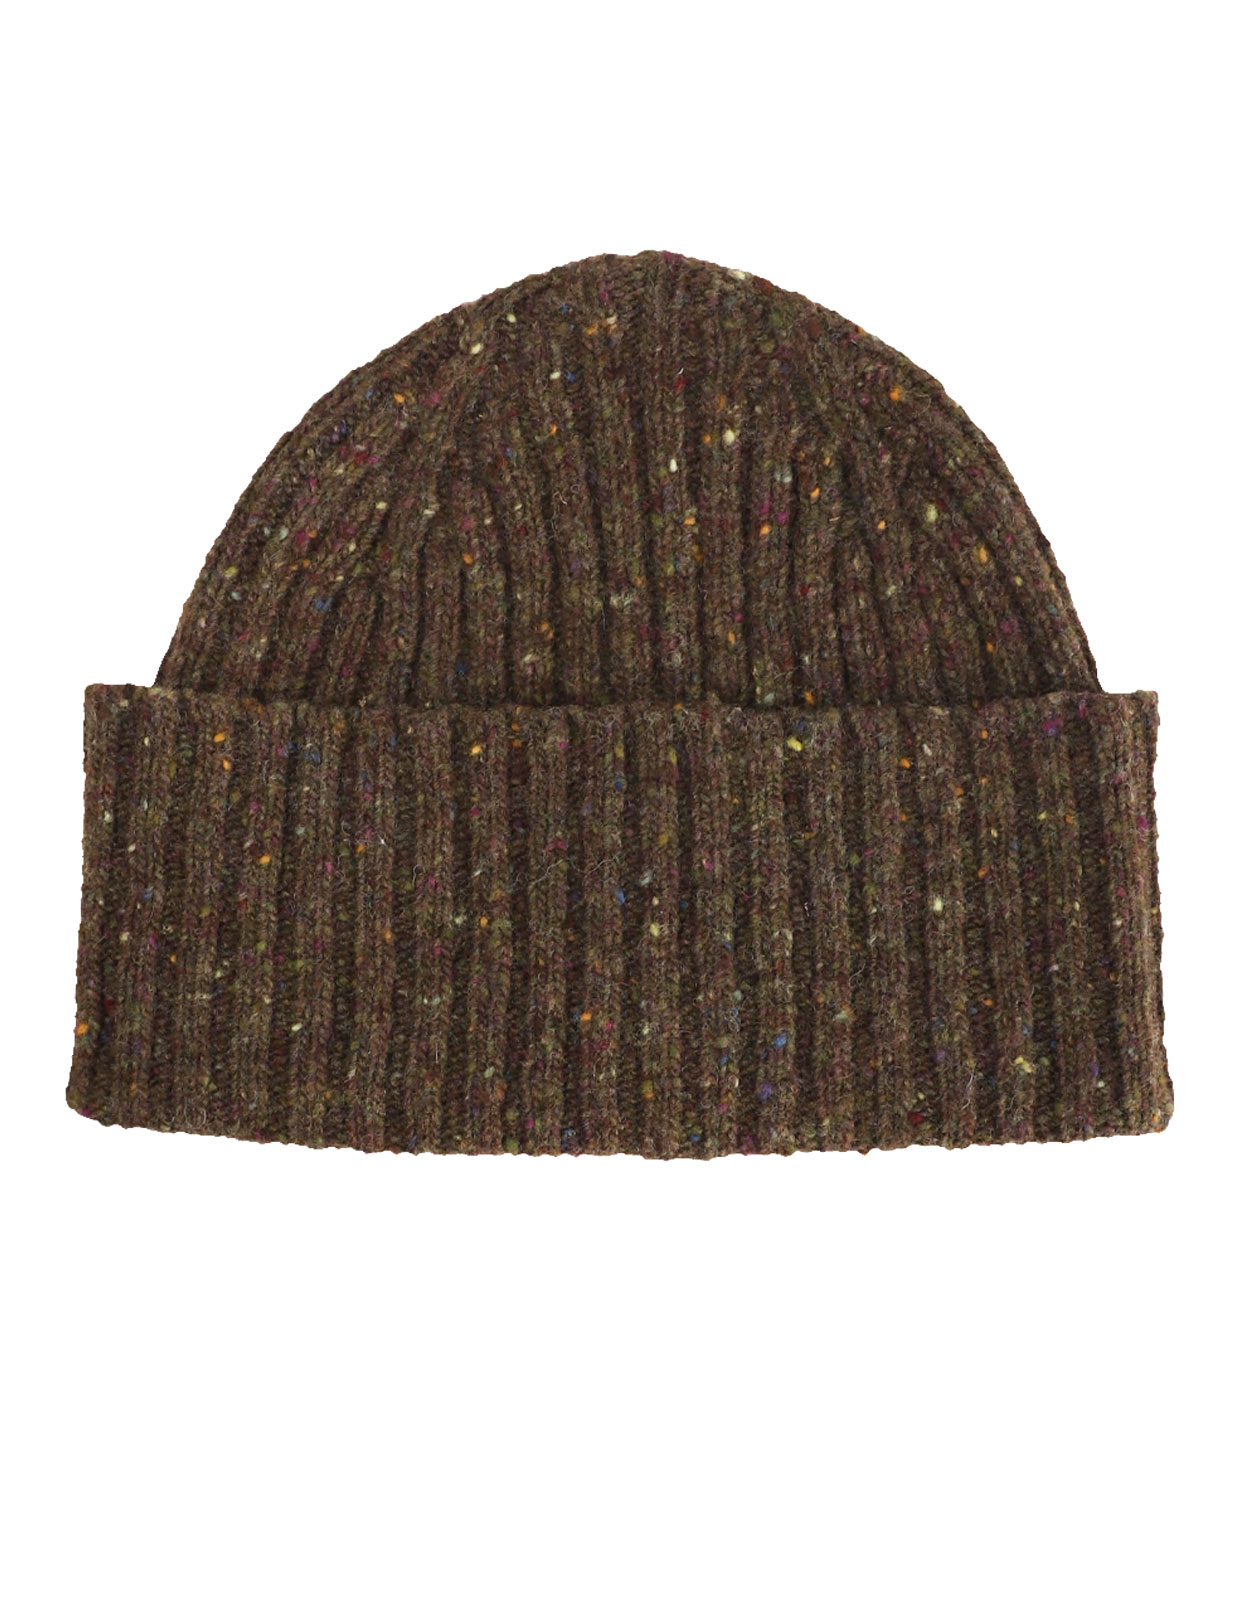 Donegal Ribbed Merino Beanie Olive Green